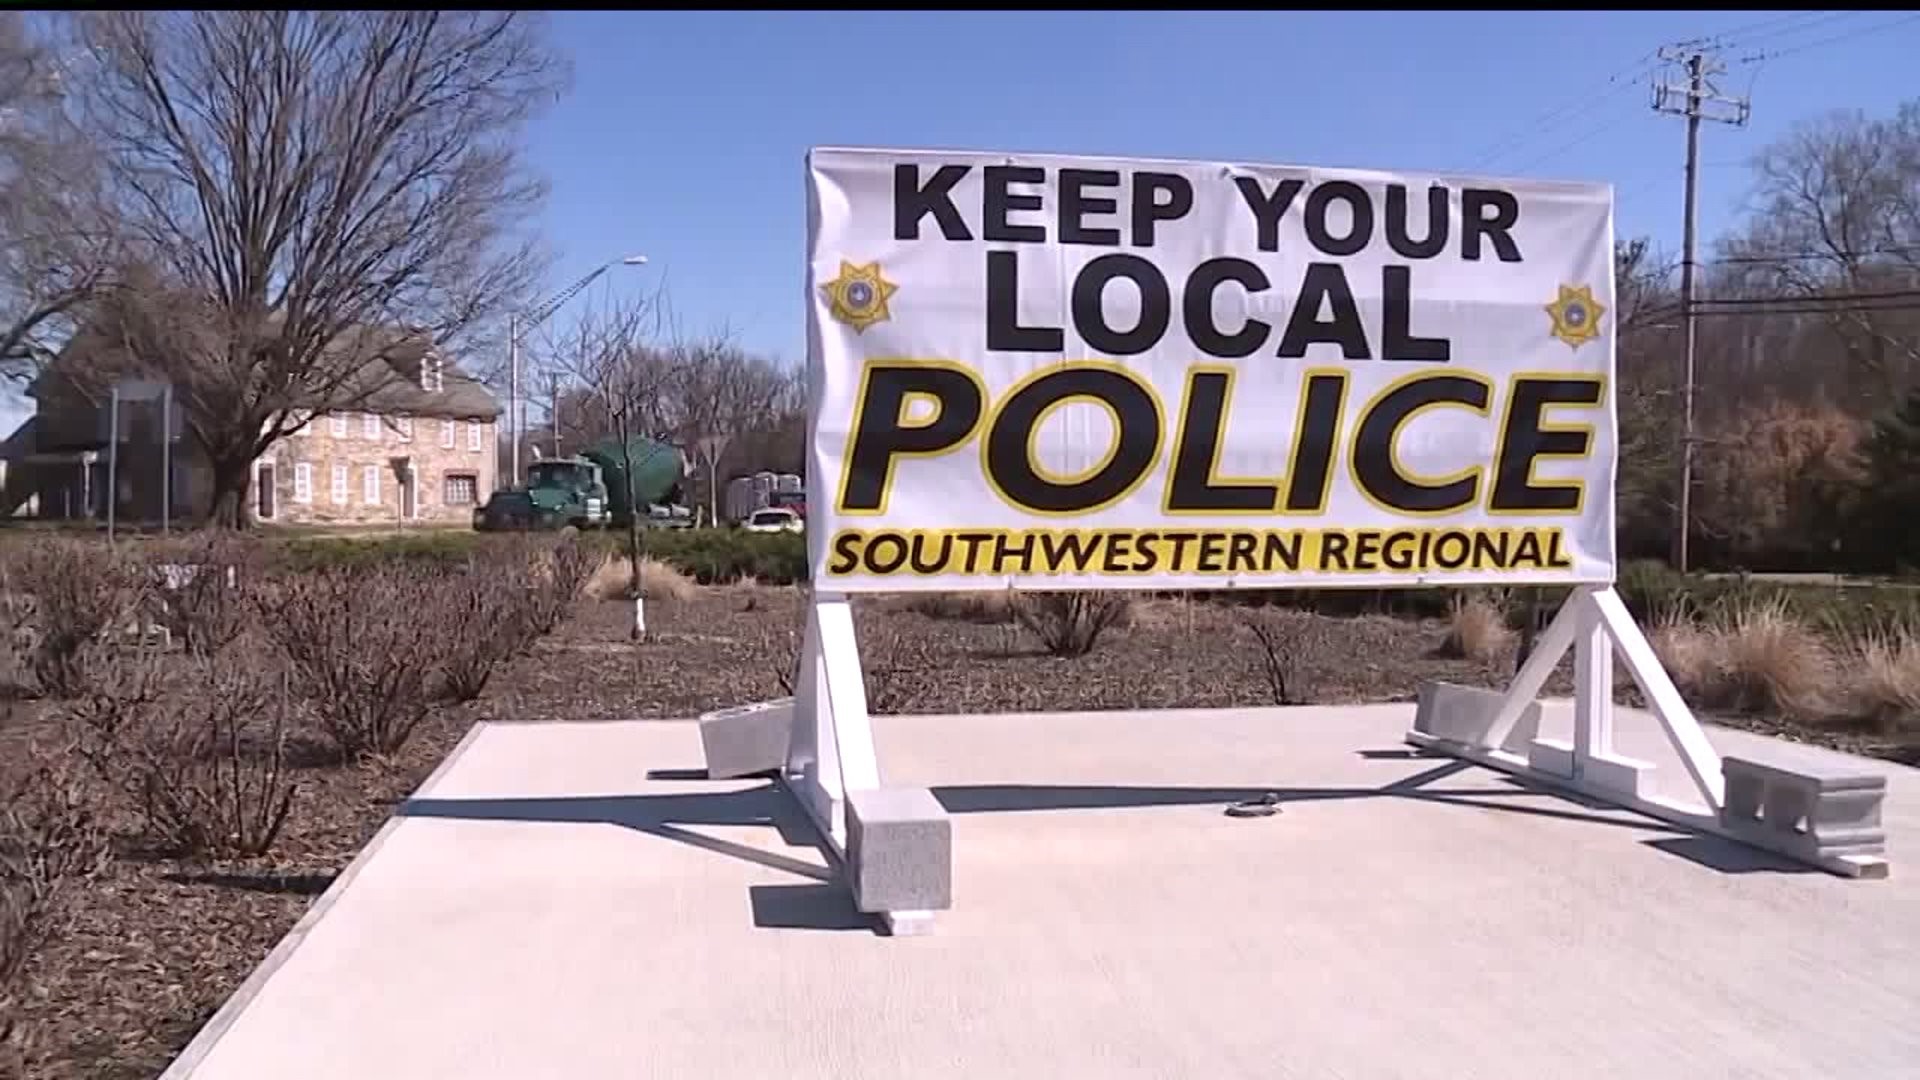 "Save our Police" rally happening Tuesday in support of Southwestern Regional Police Department